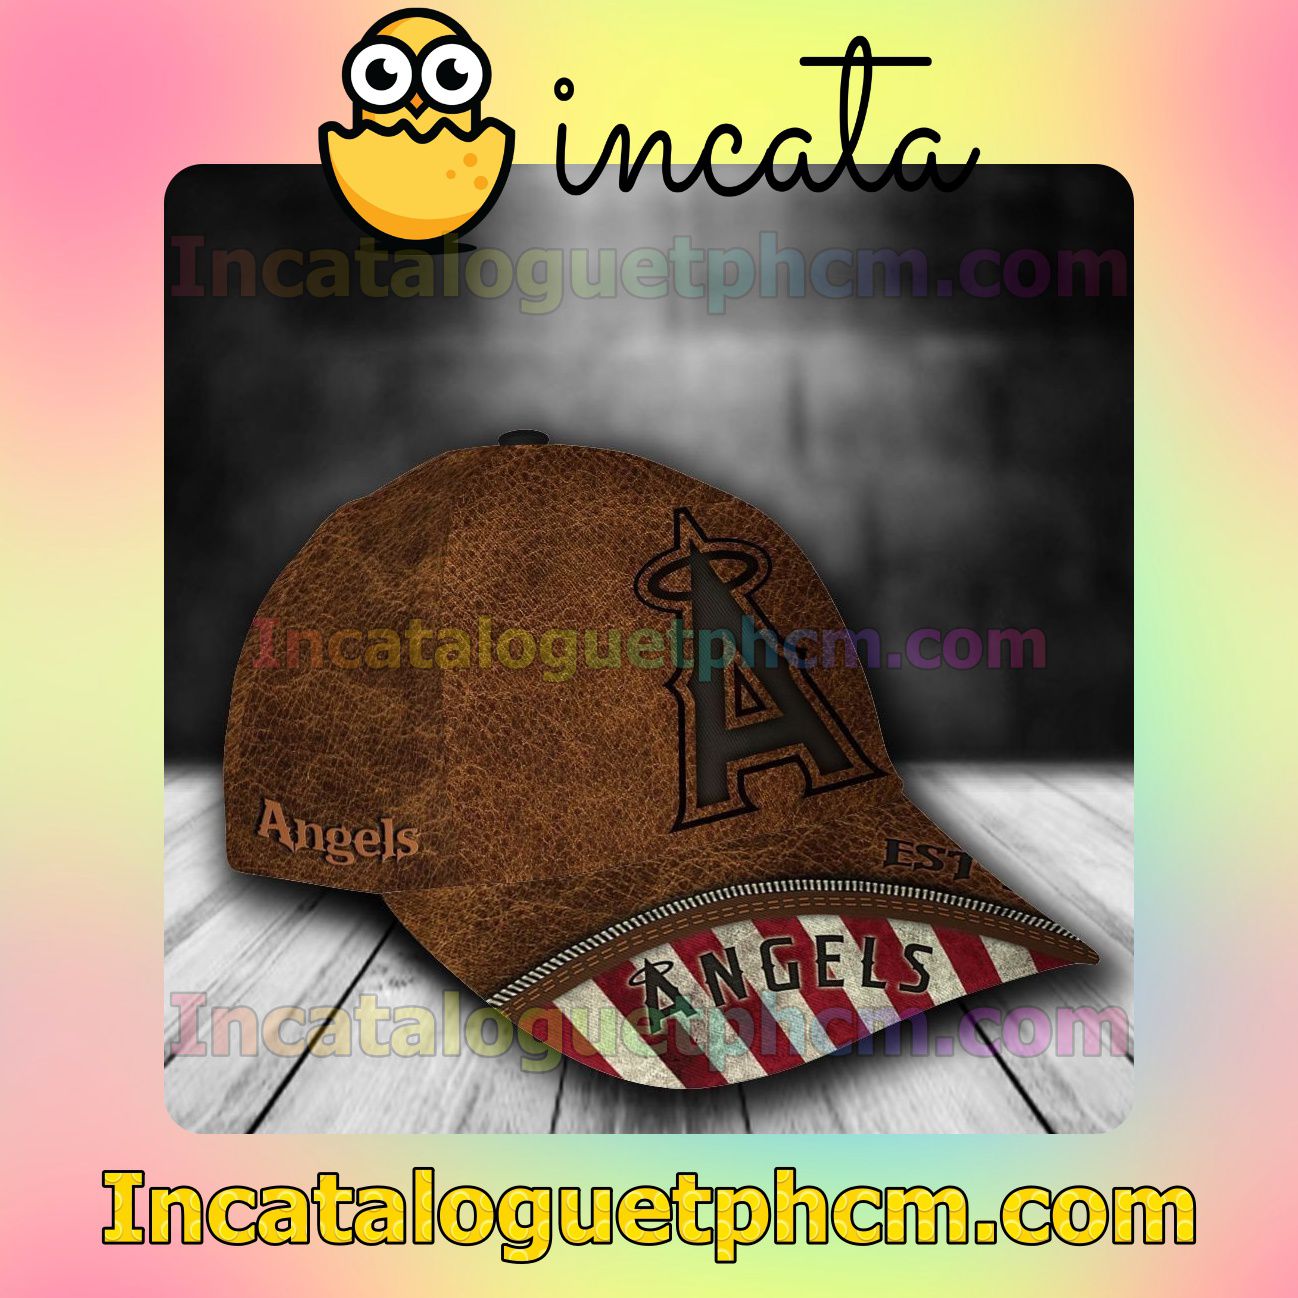 Sale Off Los Angeles Angels Leather Zipper Print MLB Customized Hat Caps